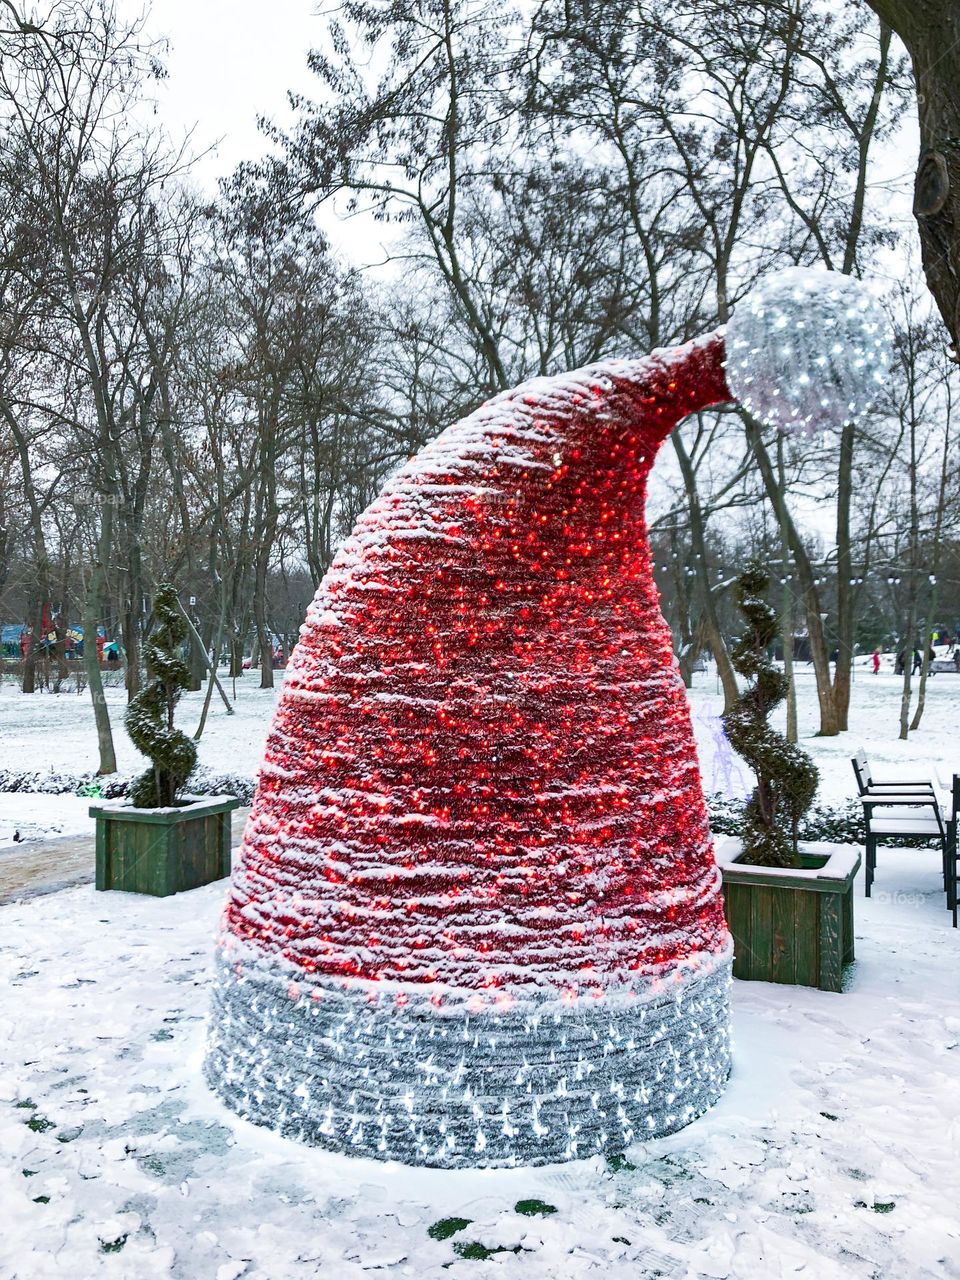 Red Santa Claus’s hat as installation in a snowy park